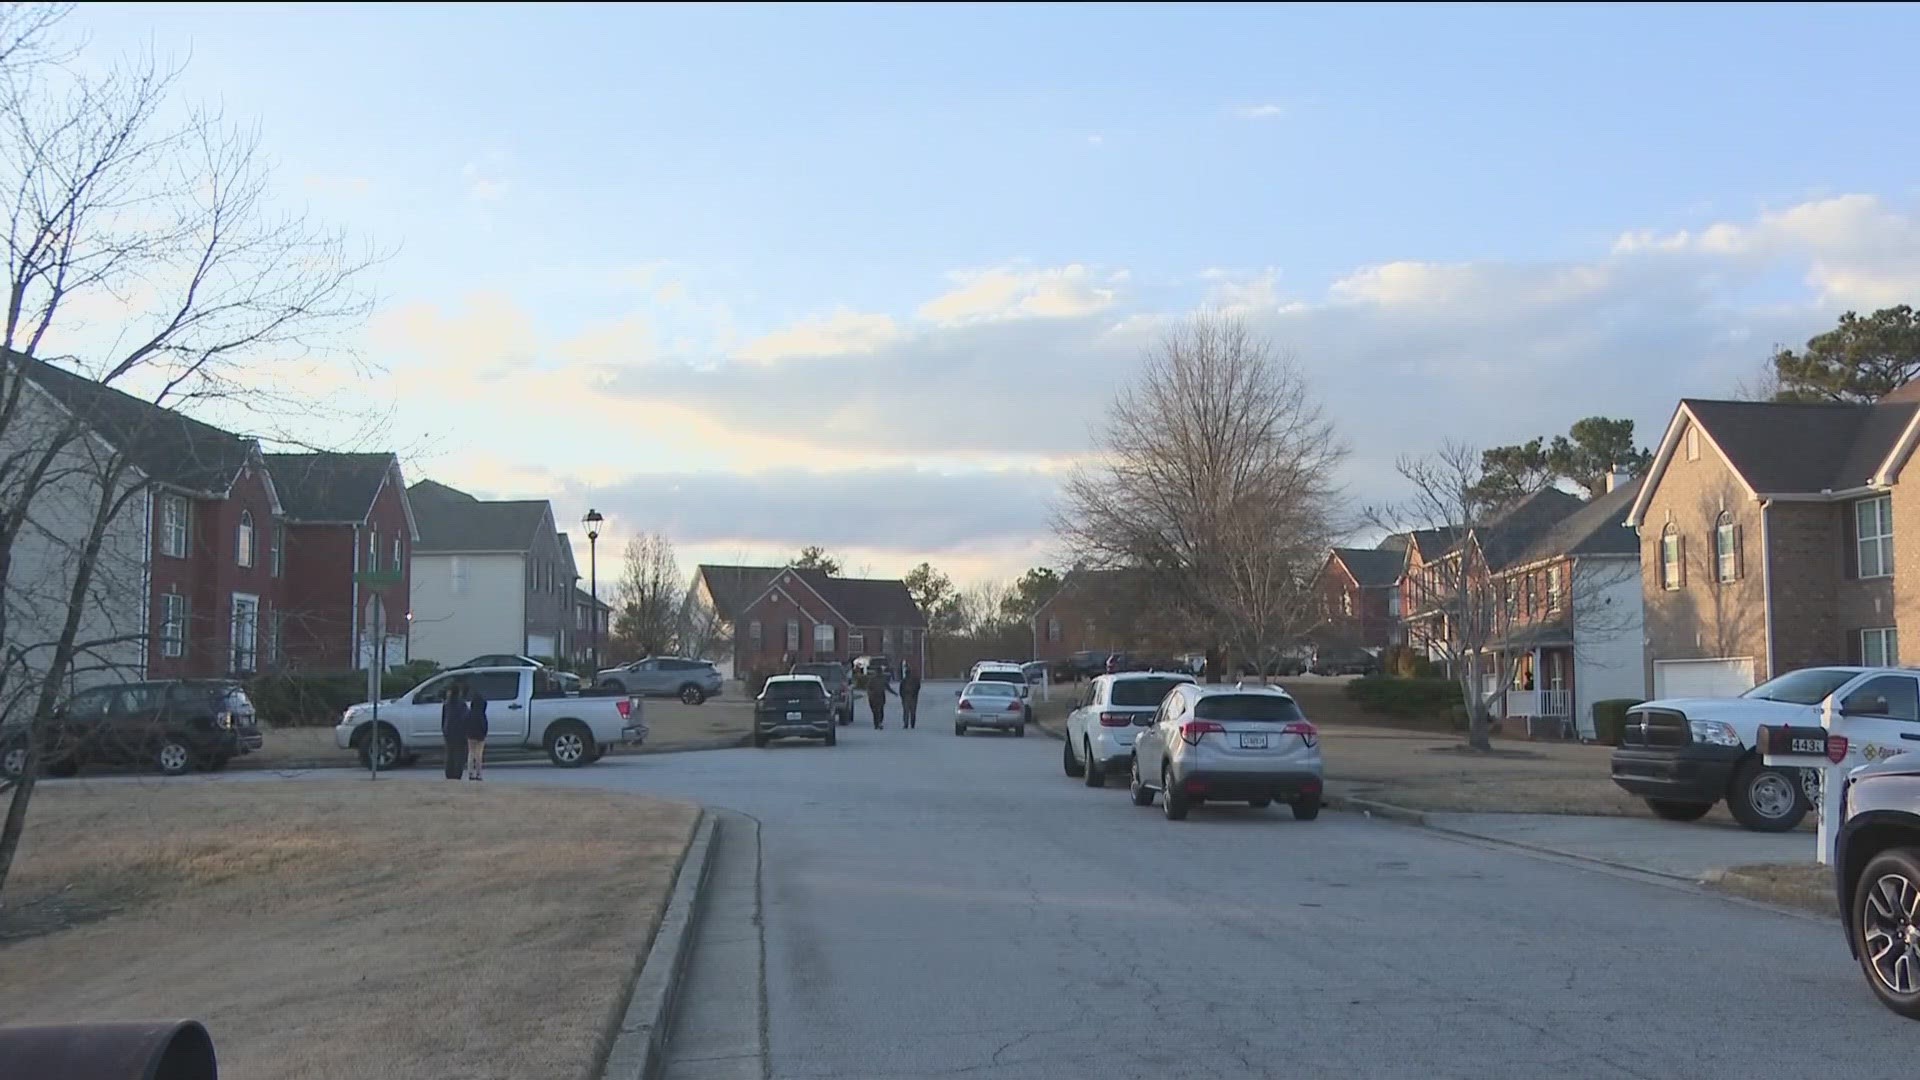 One man is dead after a shooting inside of a neighborhood in Ellenwood Saturday afternoon, DeKalb County Police said.